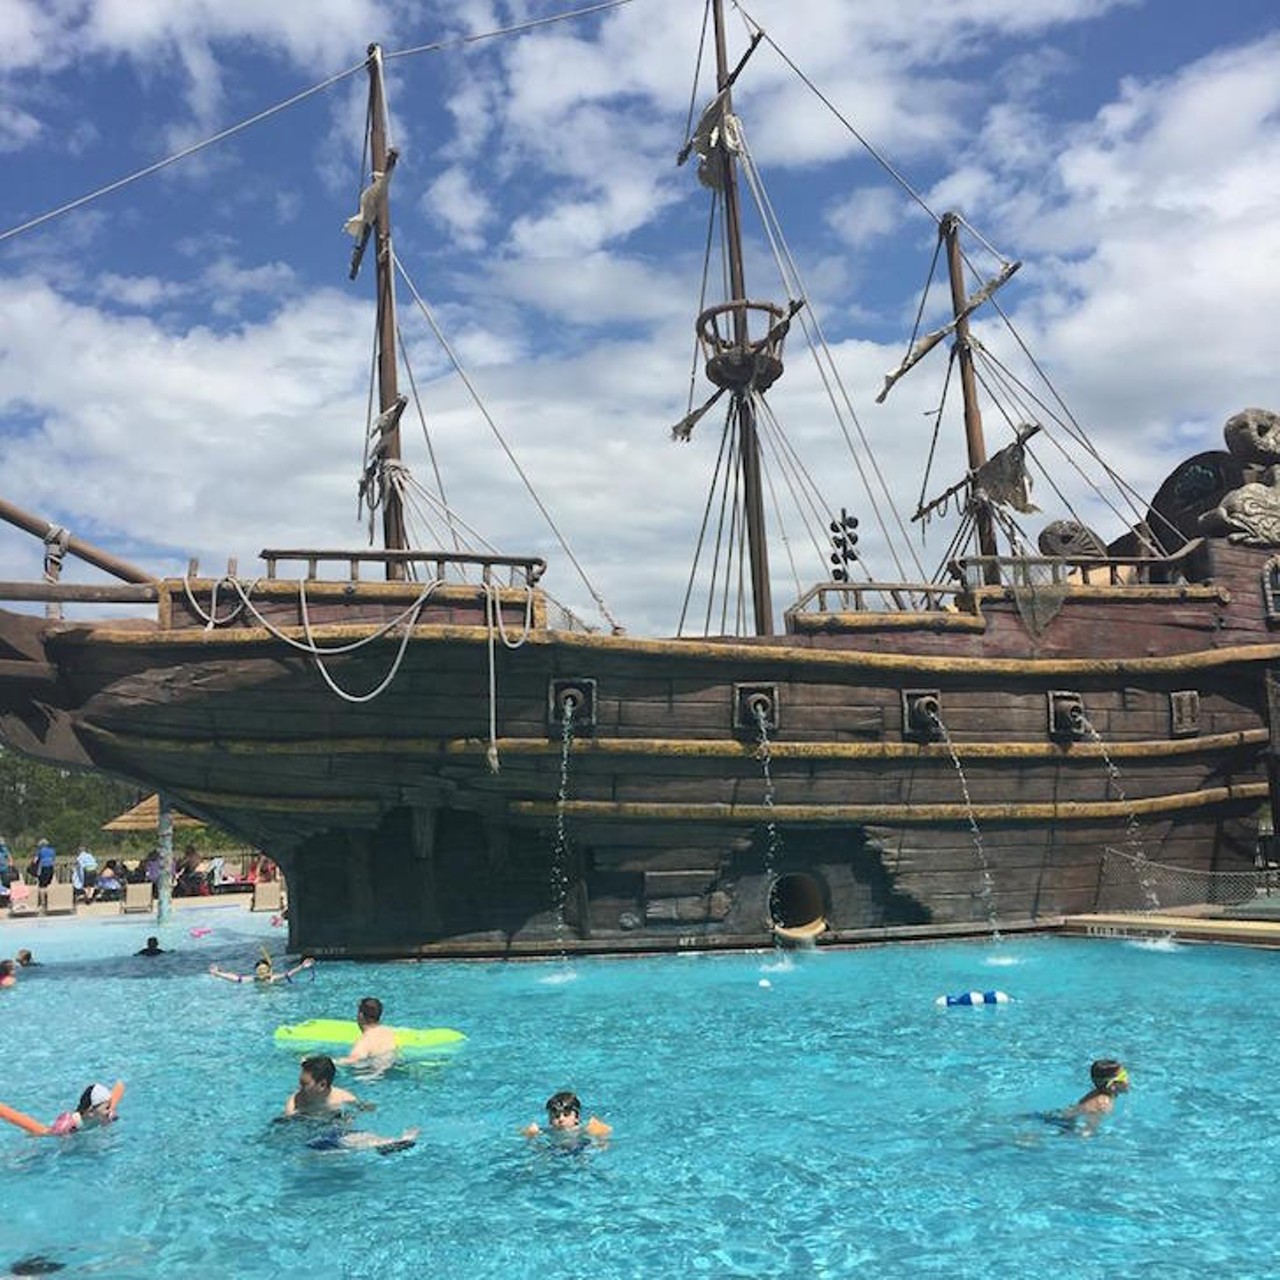 Lake Buena Vista Resort Village & Spa
8113 Resort Village Drive, 407-597-0214
Swimming beside a pirate ship may be a dream of yours. If so, you&#146;ll be happy to hear that Lake Buena Vista features a Pirate&#146;s Plunge Pool, along with its Relaxation Pool. The Pirate Shipwreck that sits in the pool has shooting water cannons, a water slide, hot tubs, tumbling waterfalls, poolside loungers and hammocks. You can also grab a drink at Lani&#146;s Luau, the poolside tiki bar. Guests at the hotel can bring friends and family to use the pool as well. The pool is open from 8 a.m. to 10 p.m.
Photo via Lake Buena Vista Resort Village & Spa/Facebook